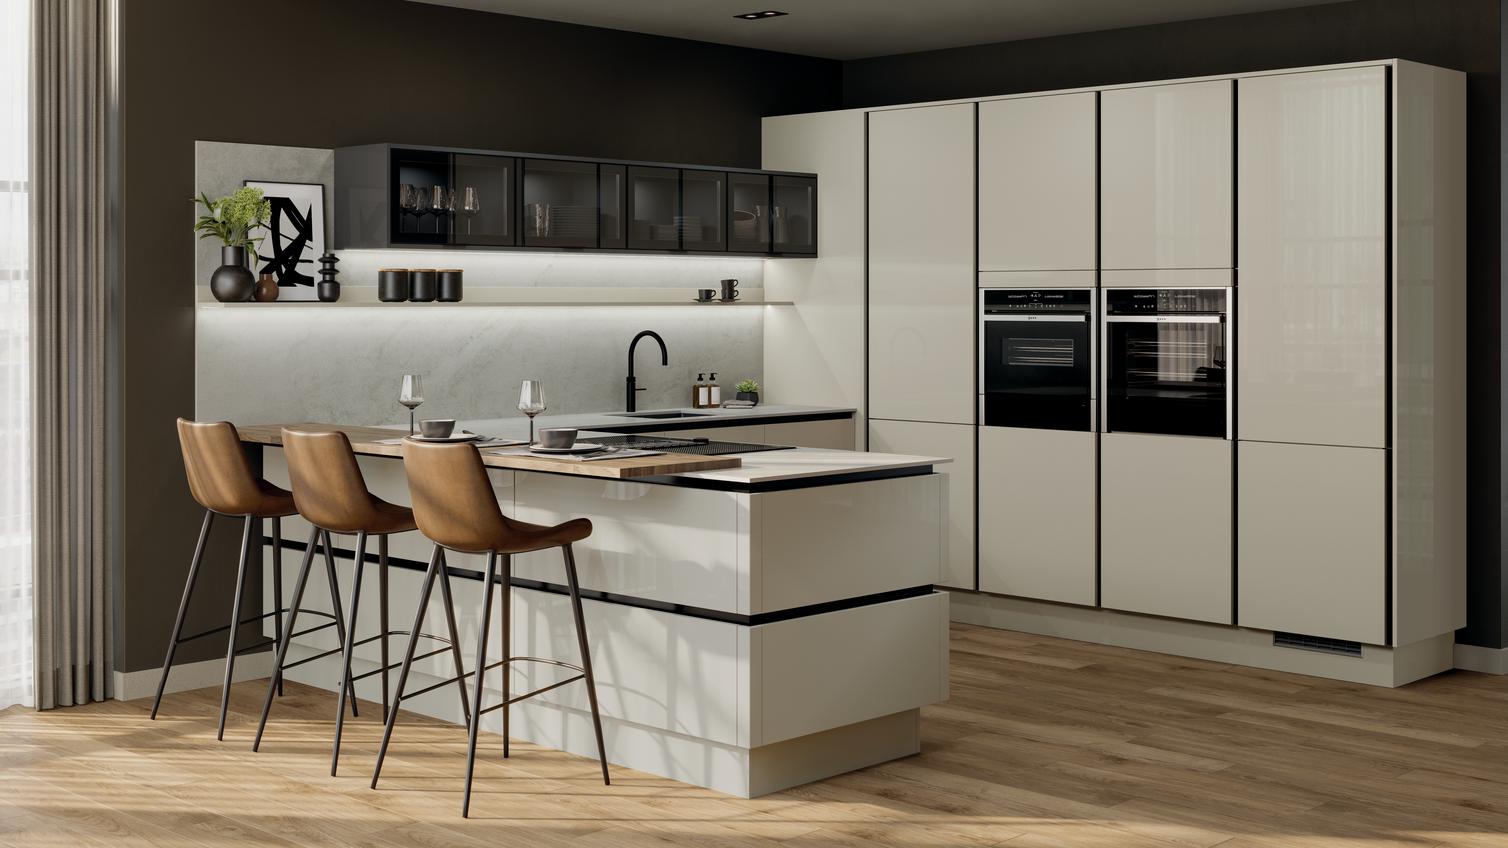 Peninsular kitchen layout with neutral slab doors in a glossy finish. Has handleless units and black trims for a modern look.